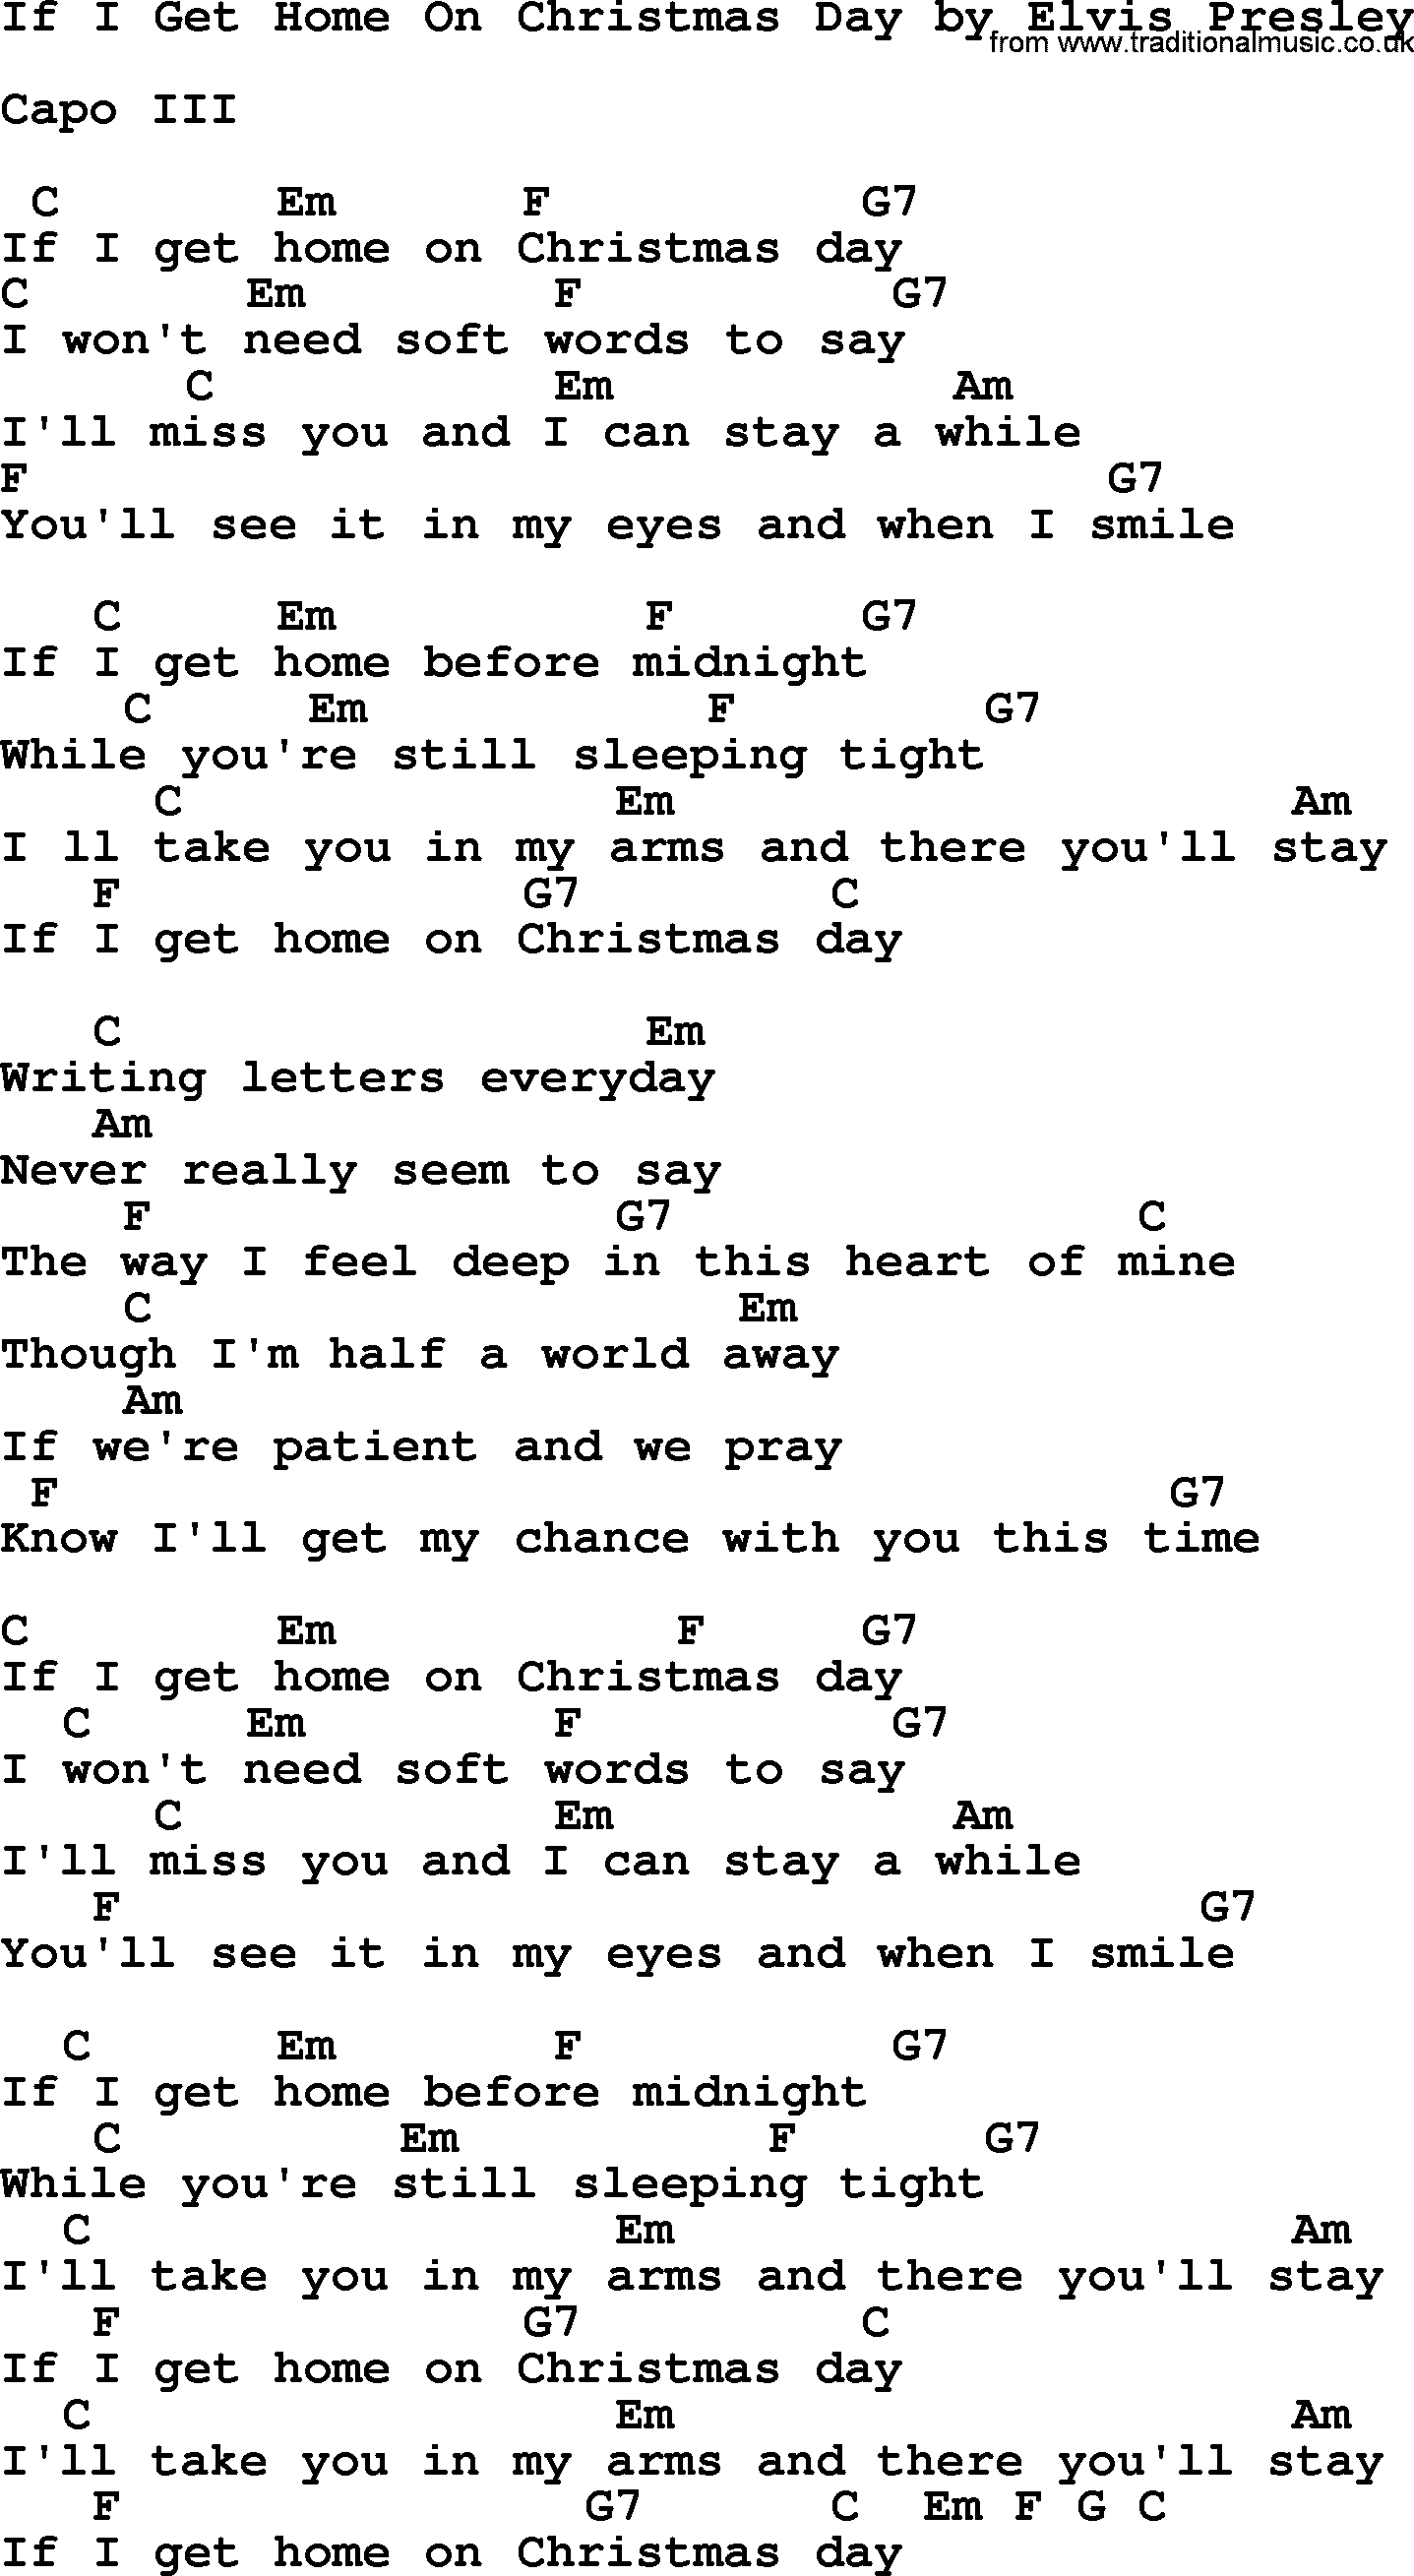 Elvis Presley song: If I Get Home On Christmas Day, lyrics and chords